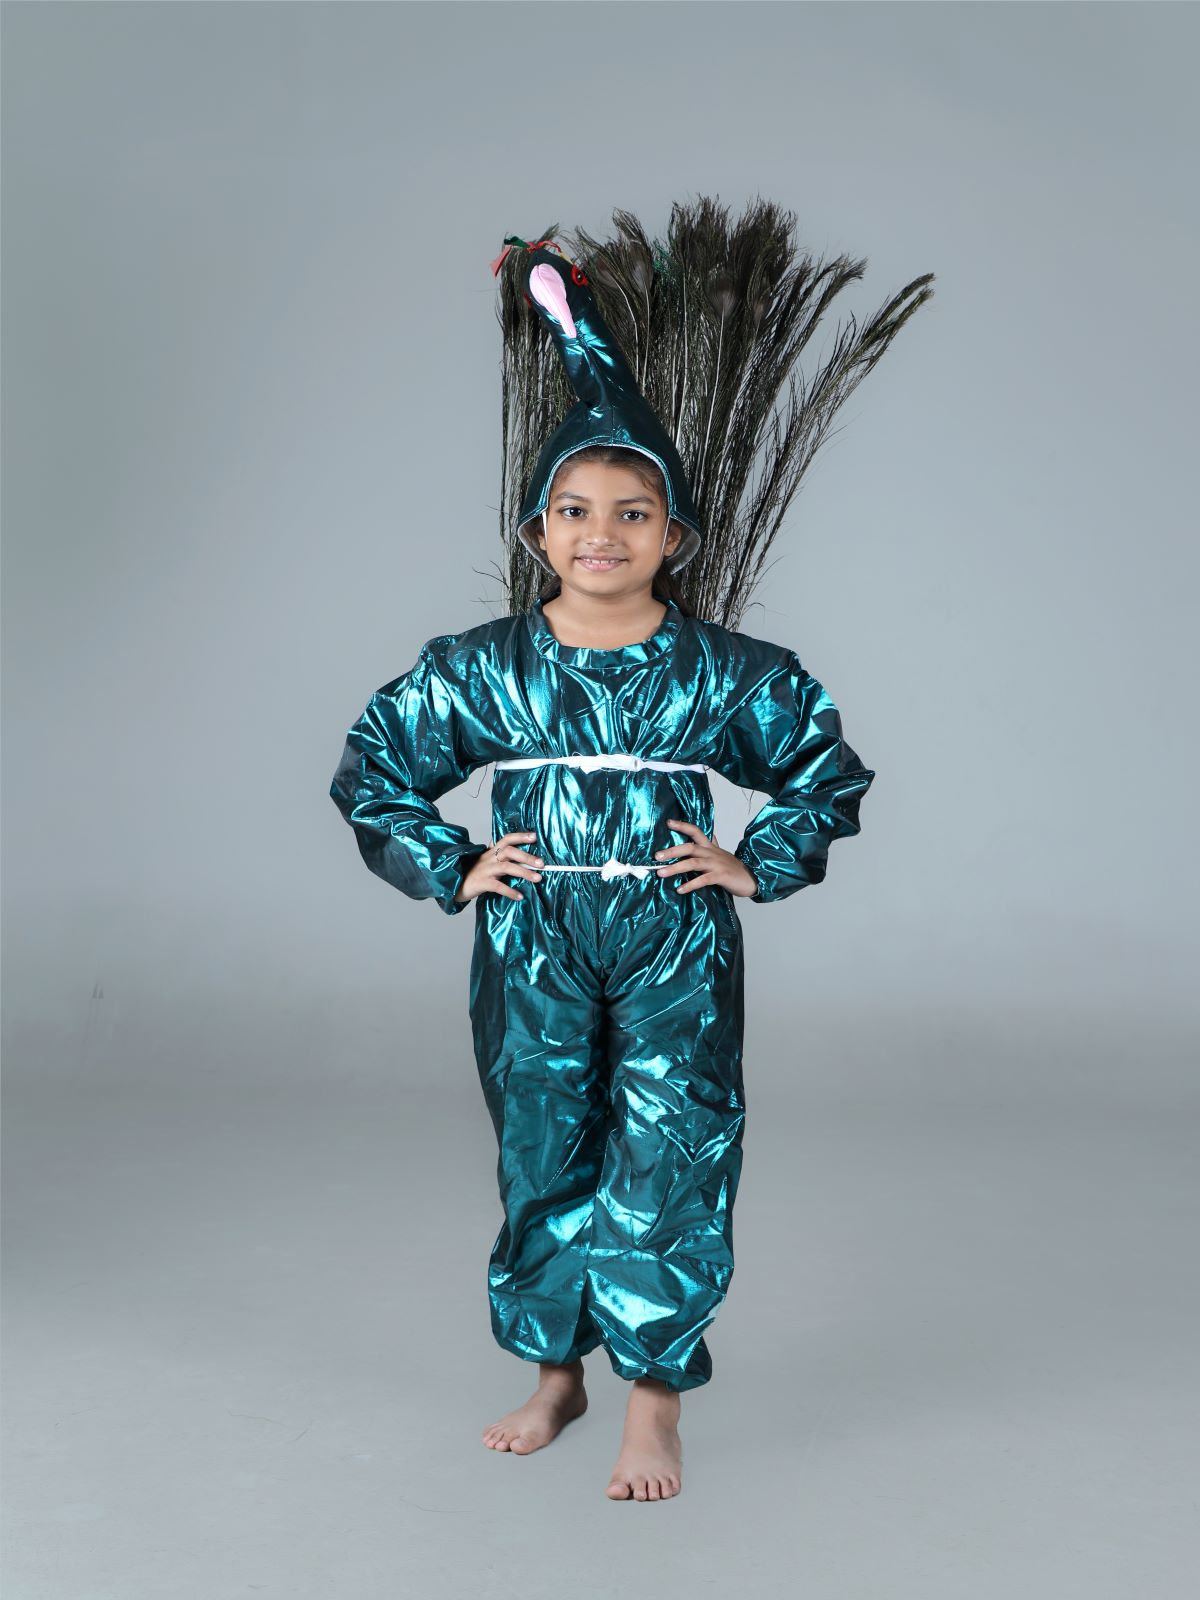 Peacock Feather Peacock Costume | Peacock Feather Ball Gown Dress - Girls  Party Tutu - Aliexpress